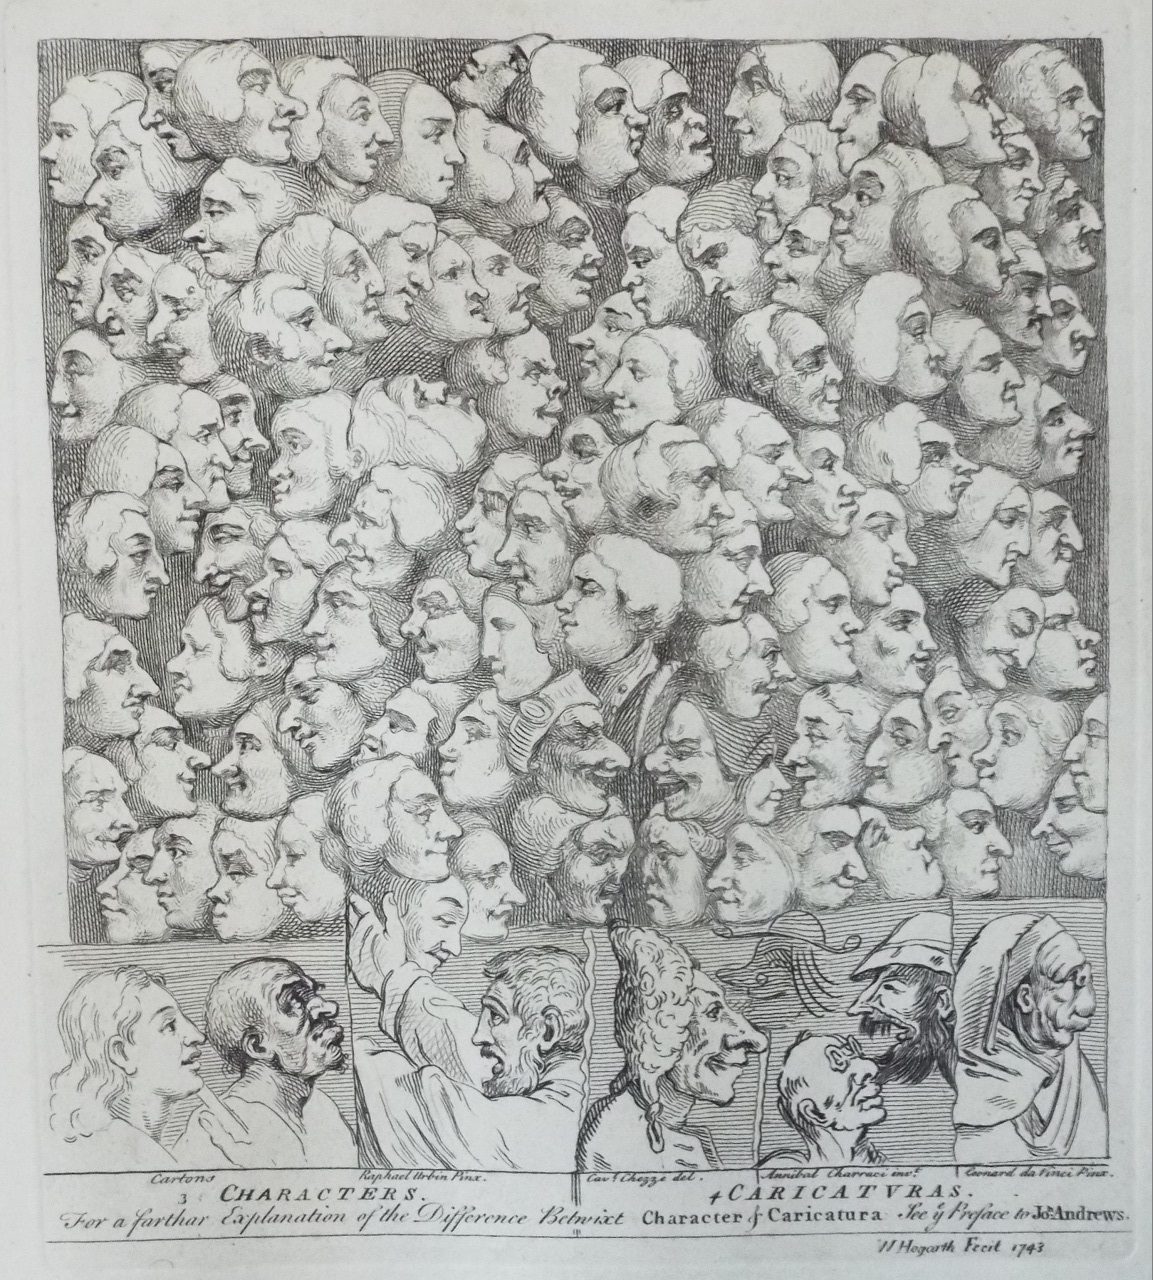 Print - Characters and Caricaturas - Hogarth